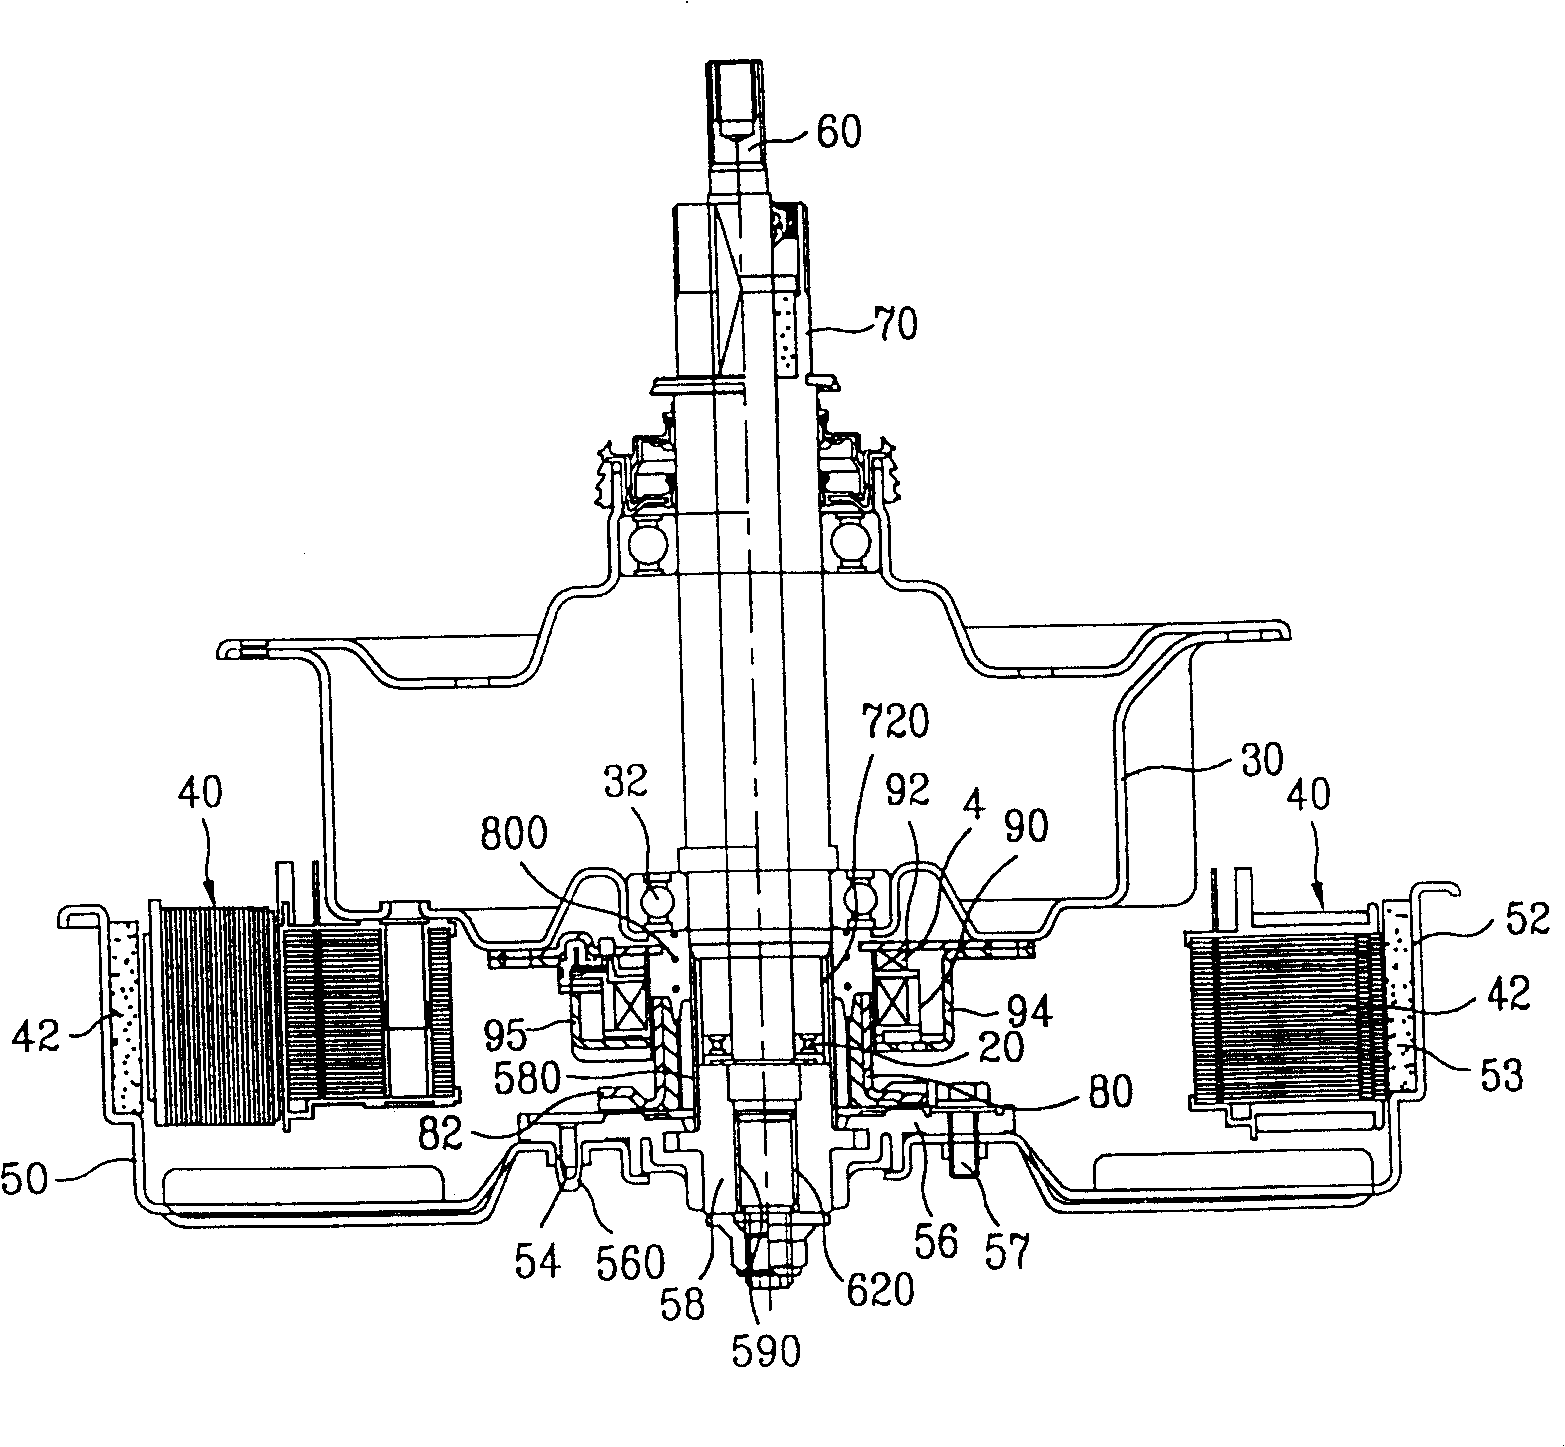 Control device of brushless D.C. motor for fully-automatic washing machine and control method thereof